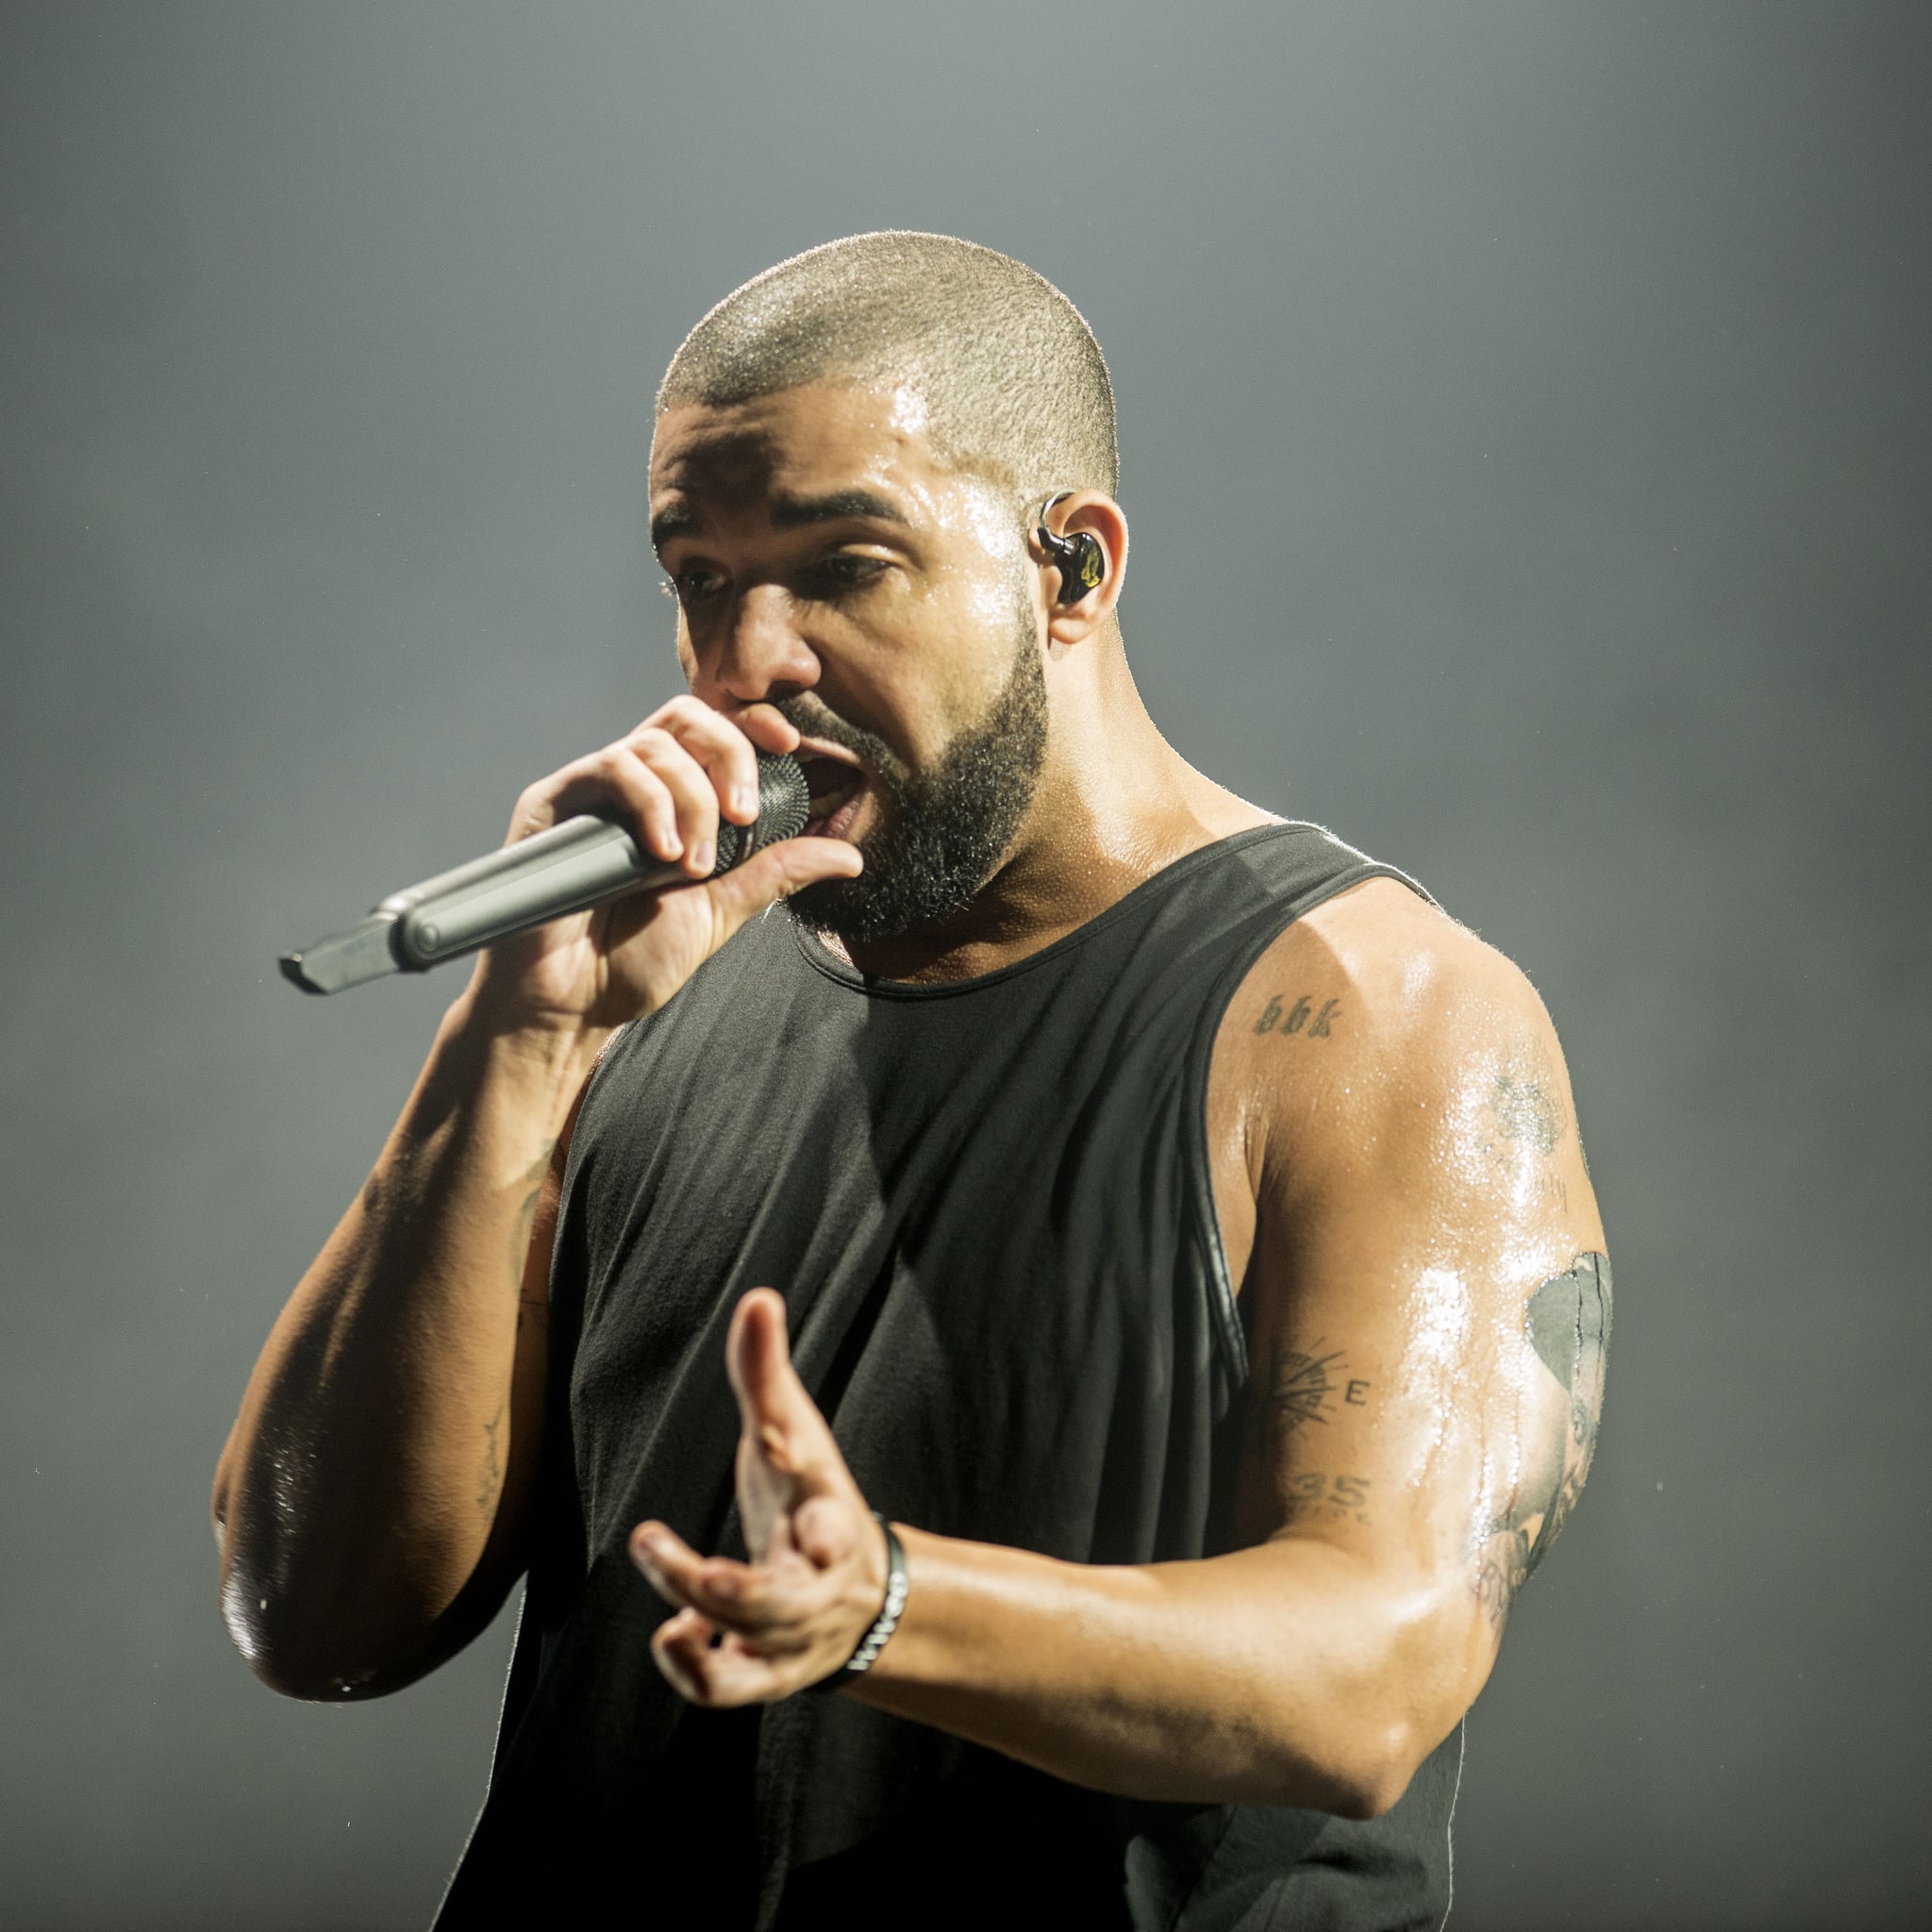 Drake Gets A New Face Tattoo Of A Slang Term With Arabic Roots | HipHopDX